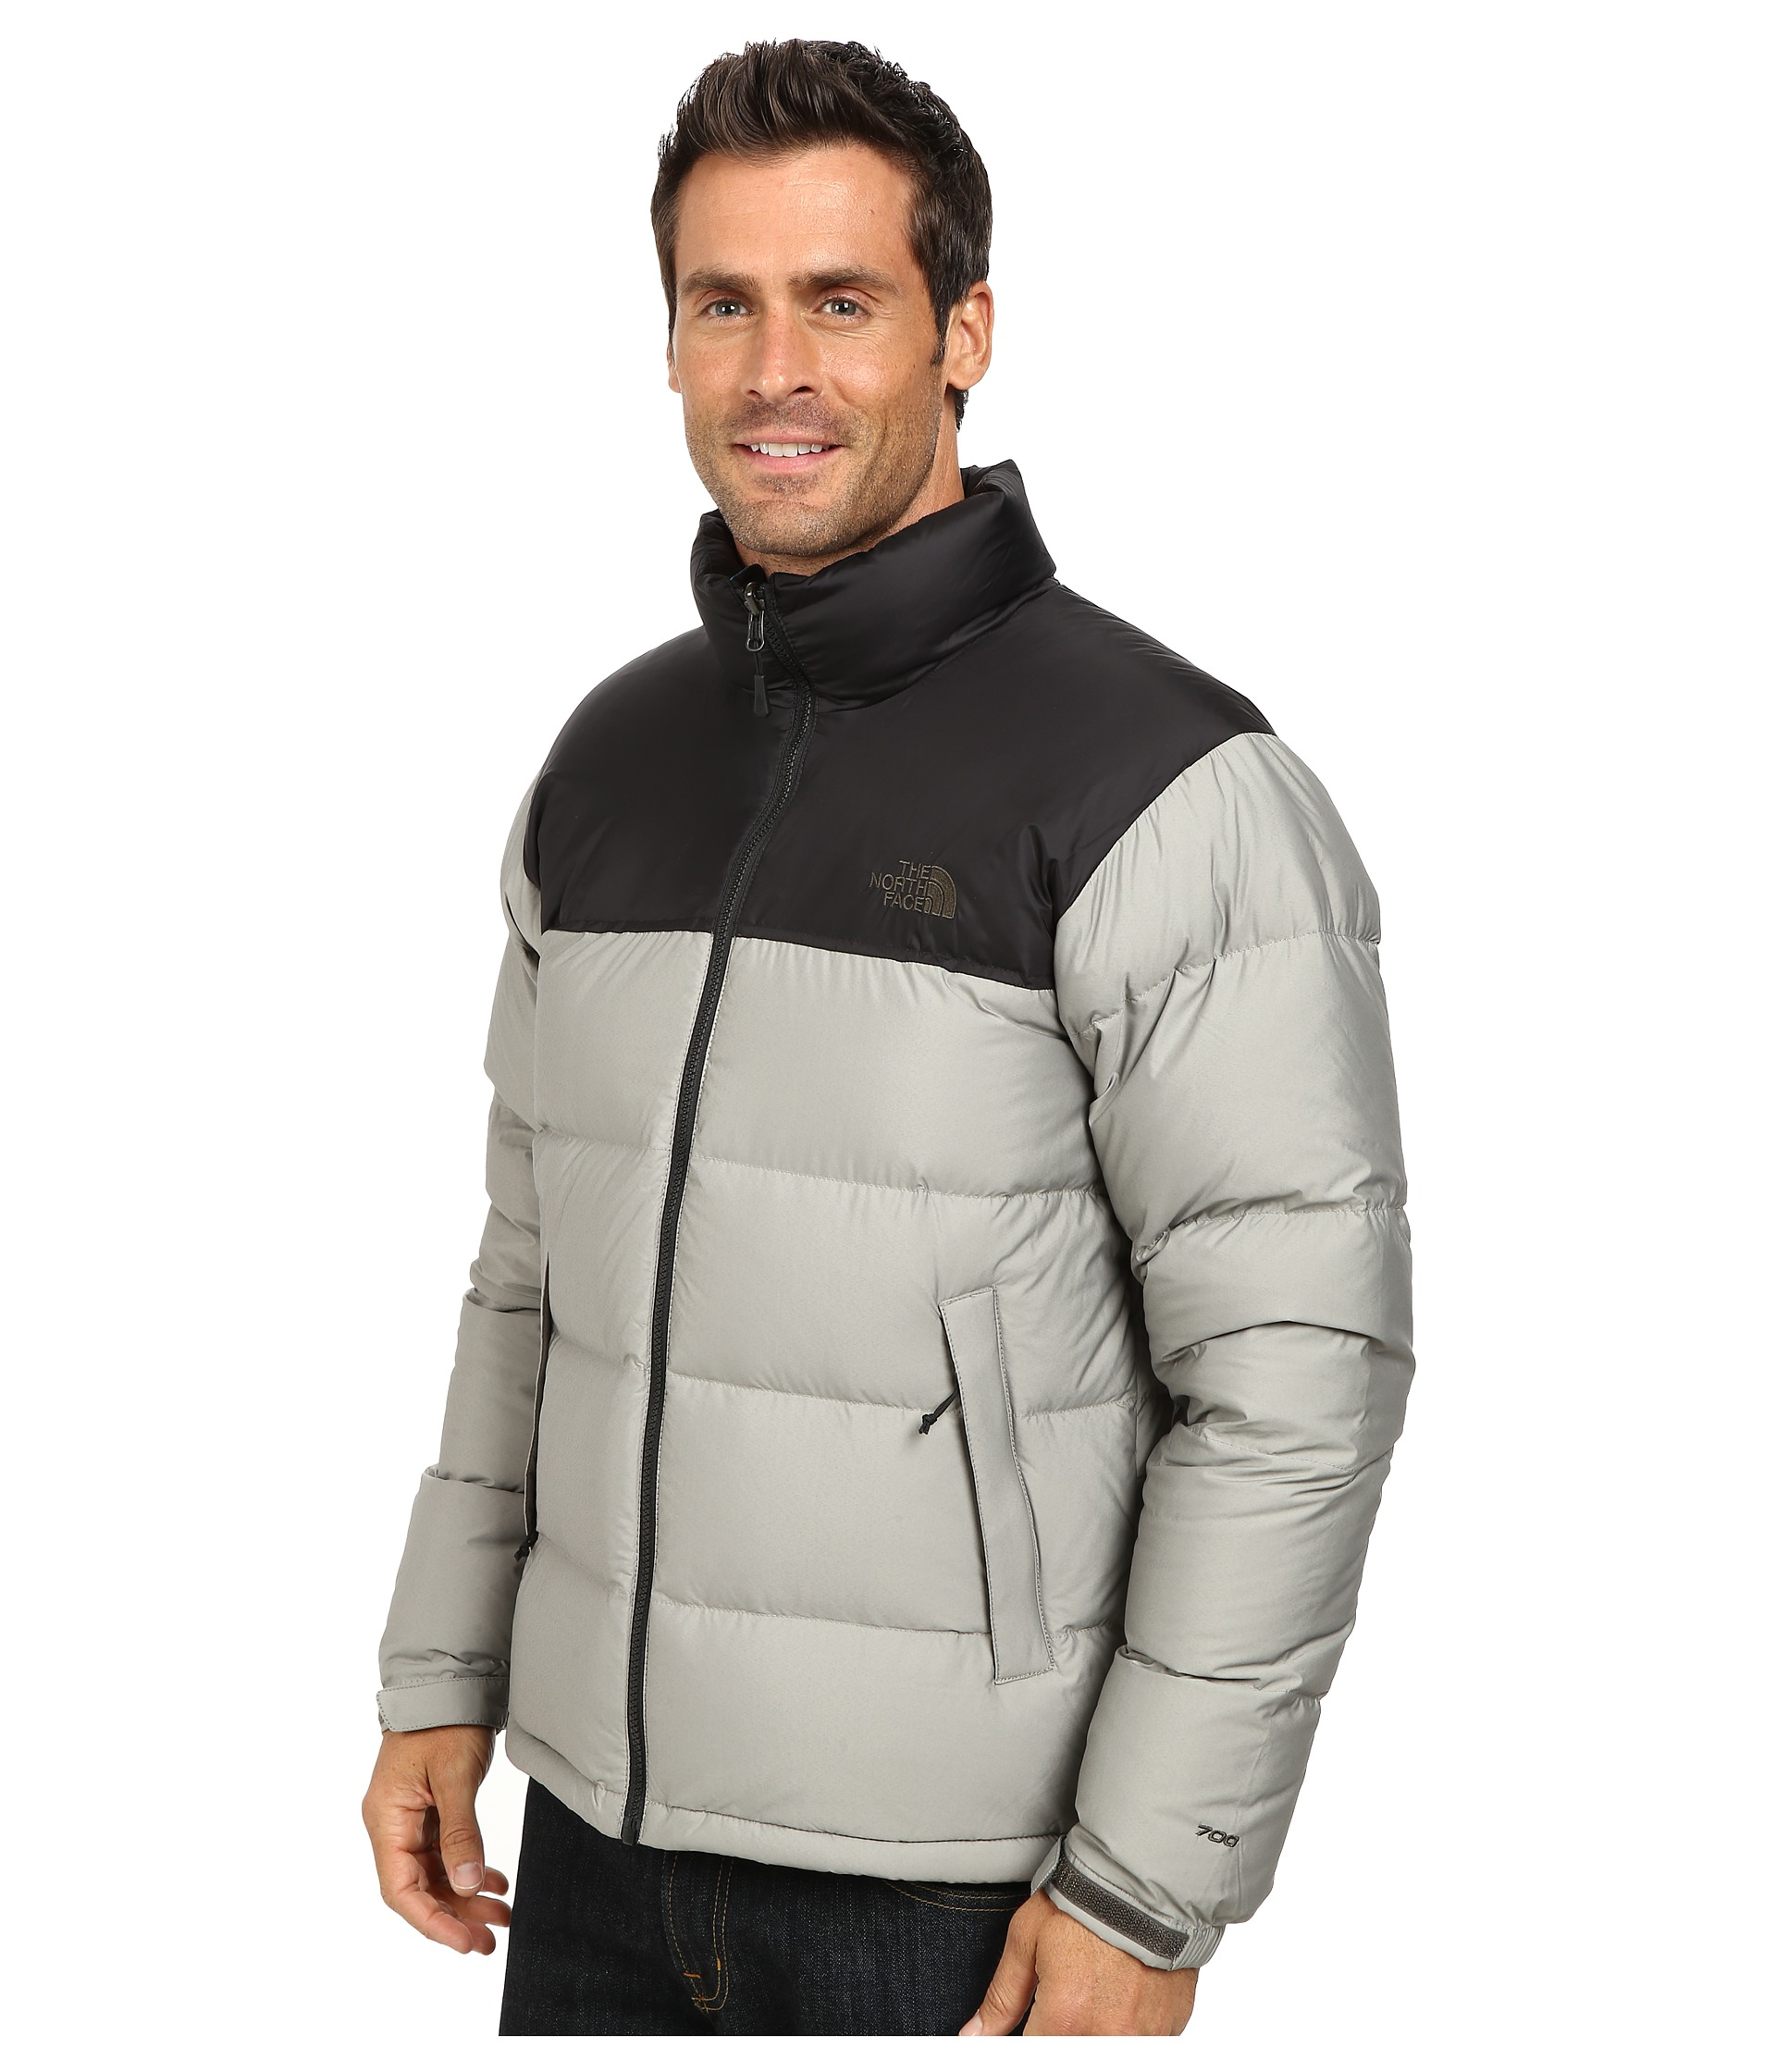 The North Face Nuptse Jacket in Gray for Men - Lyst